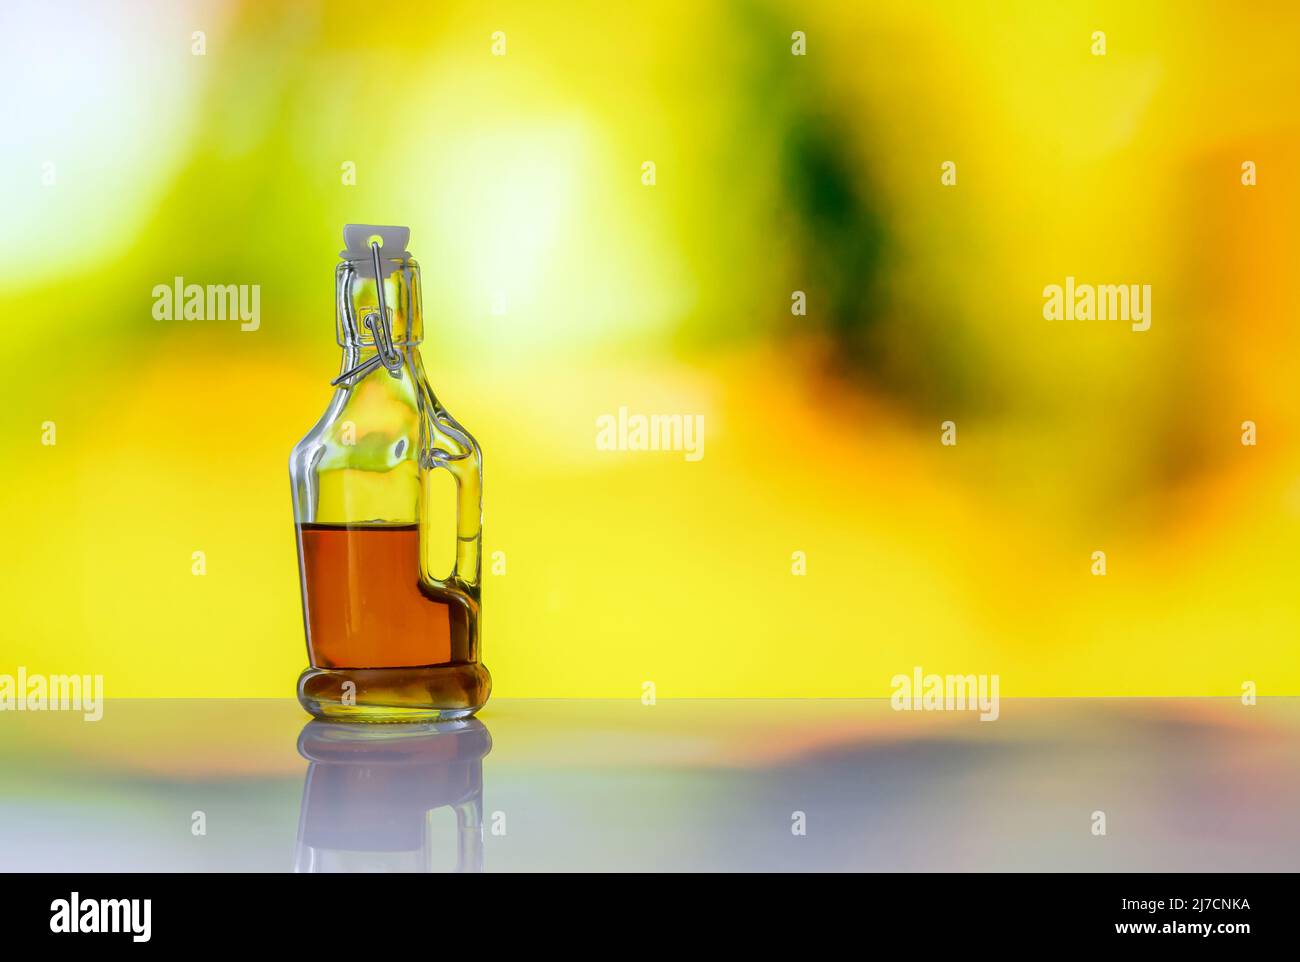 stylish bottle with colored alcohol on a soft blurred background Stock Photo